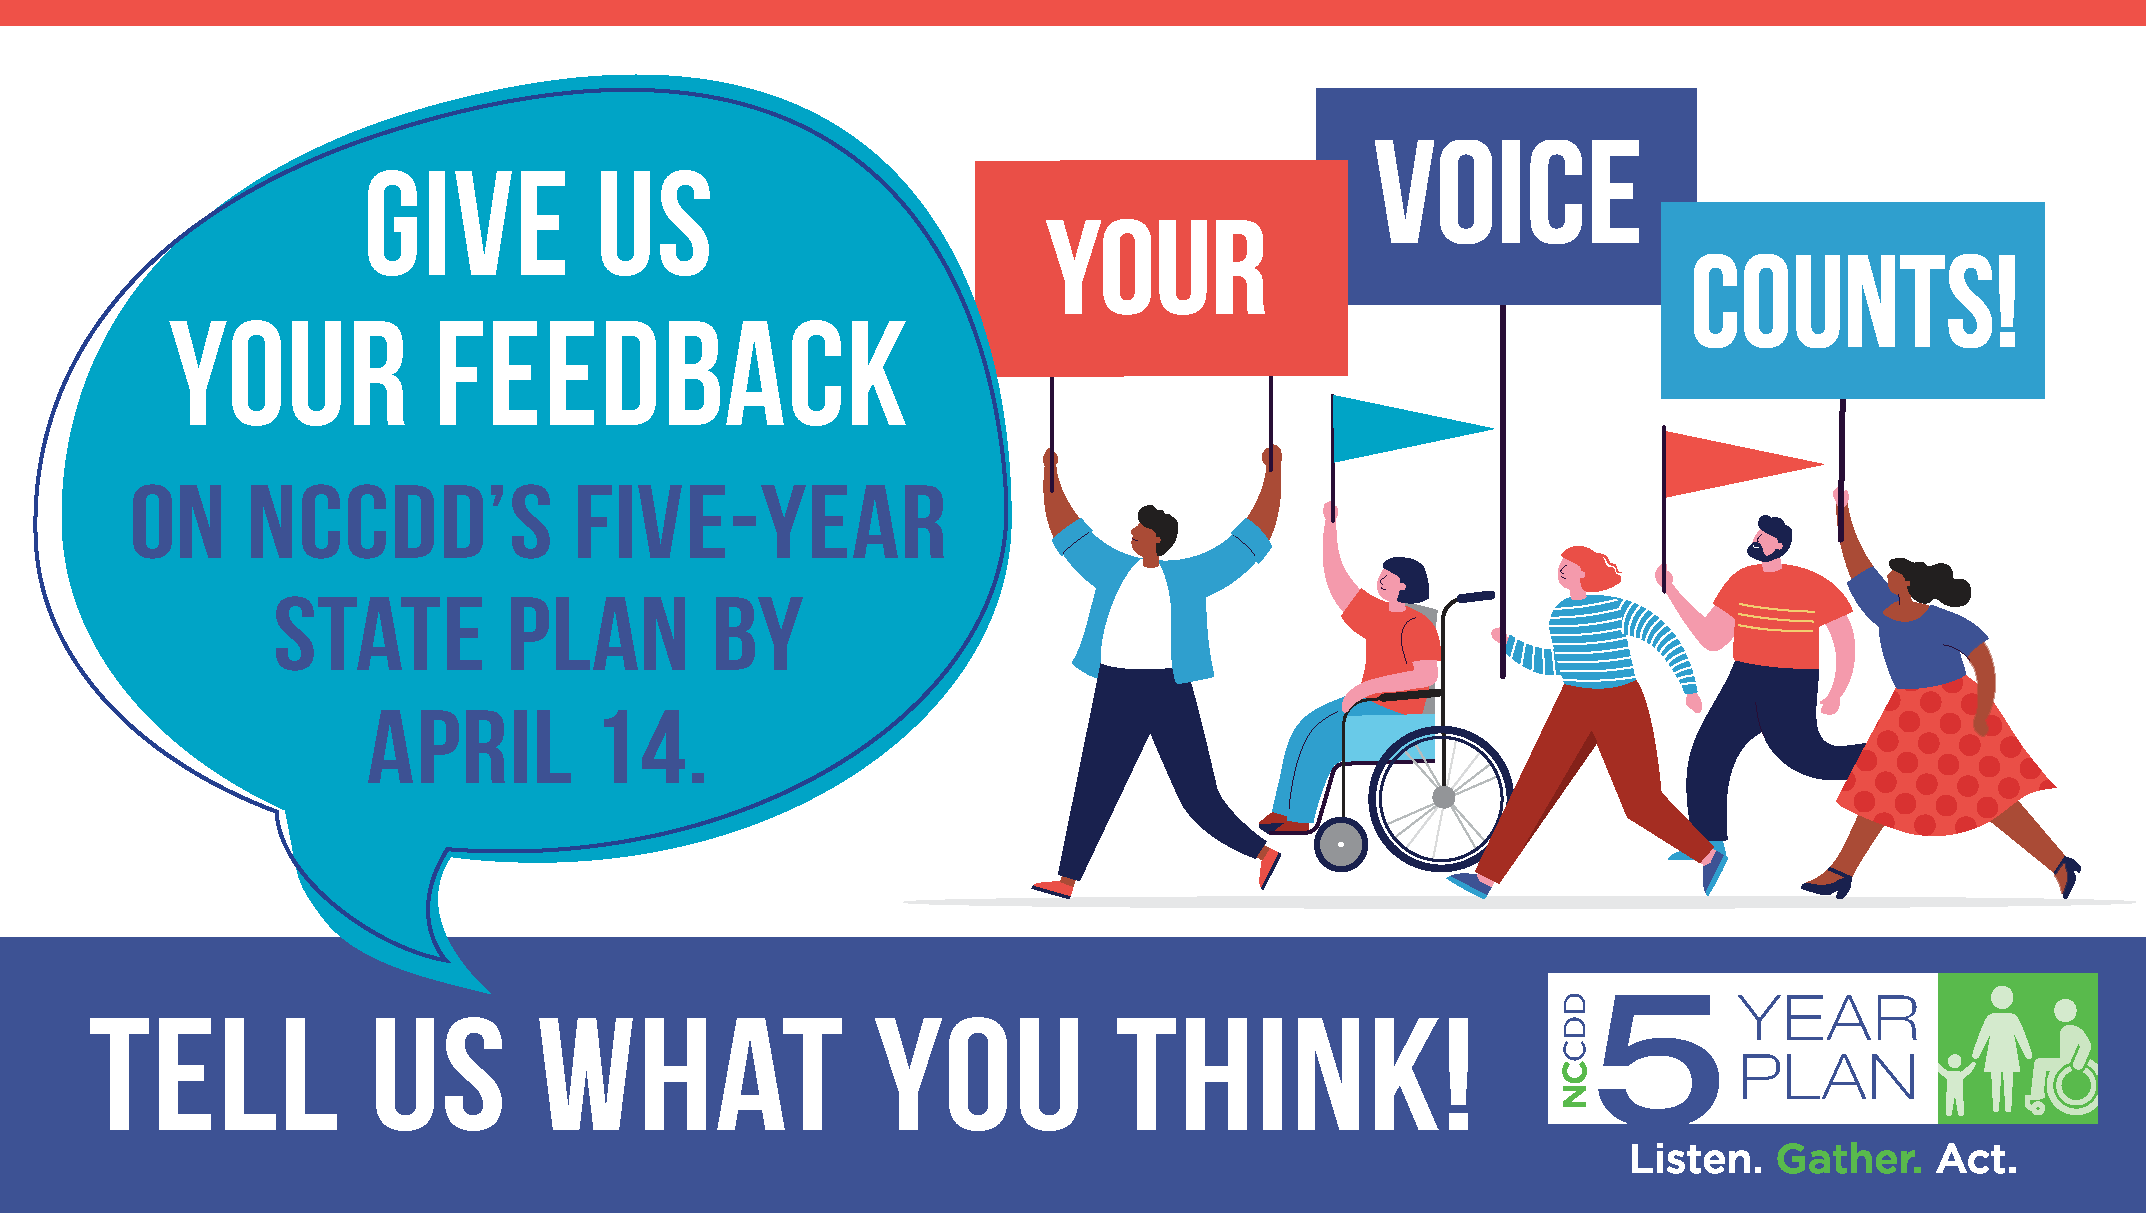 Give us your feedback on NCCDD's Five-Year State Plan by April 14. Your Voice Counts!